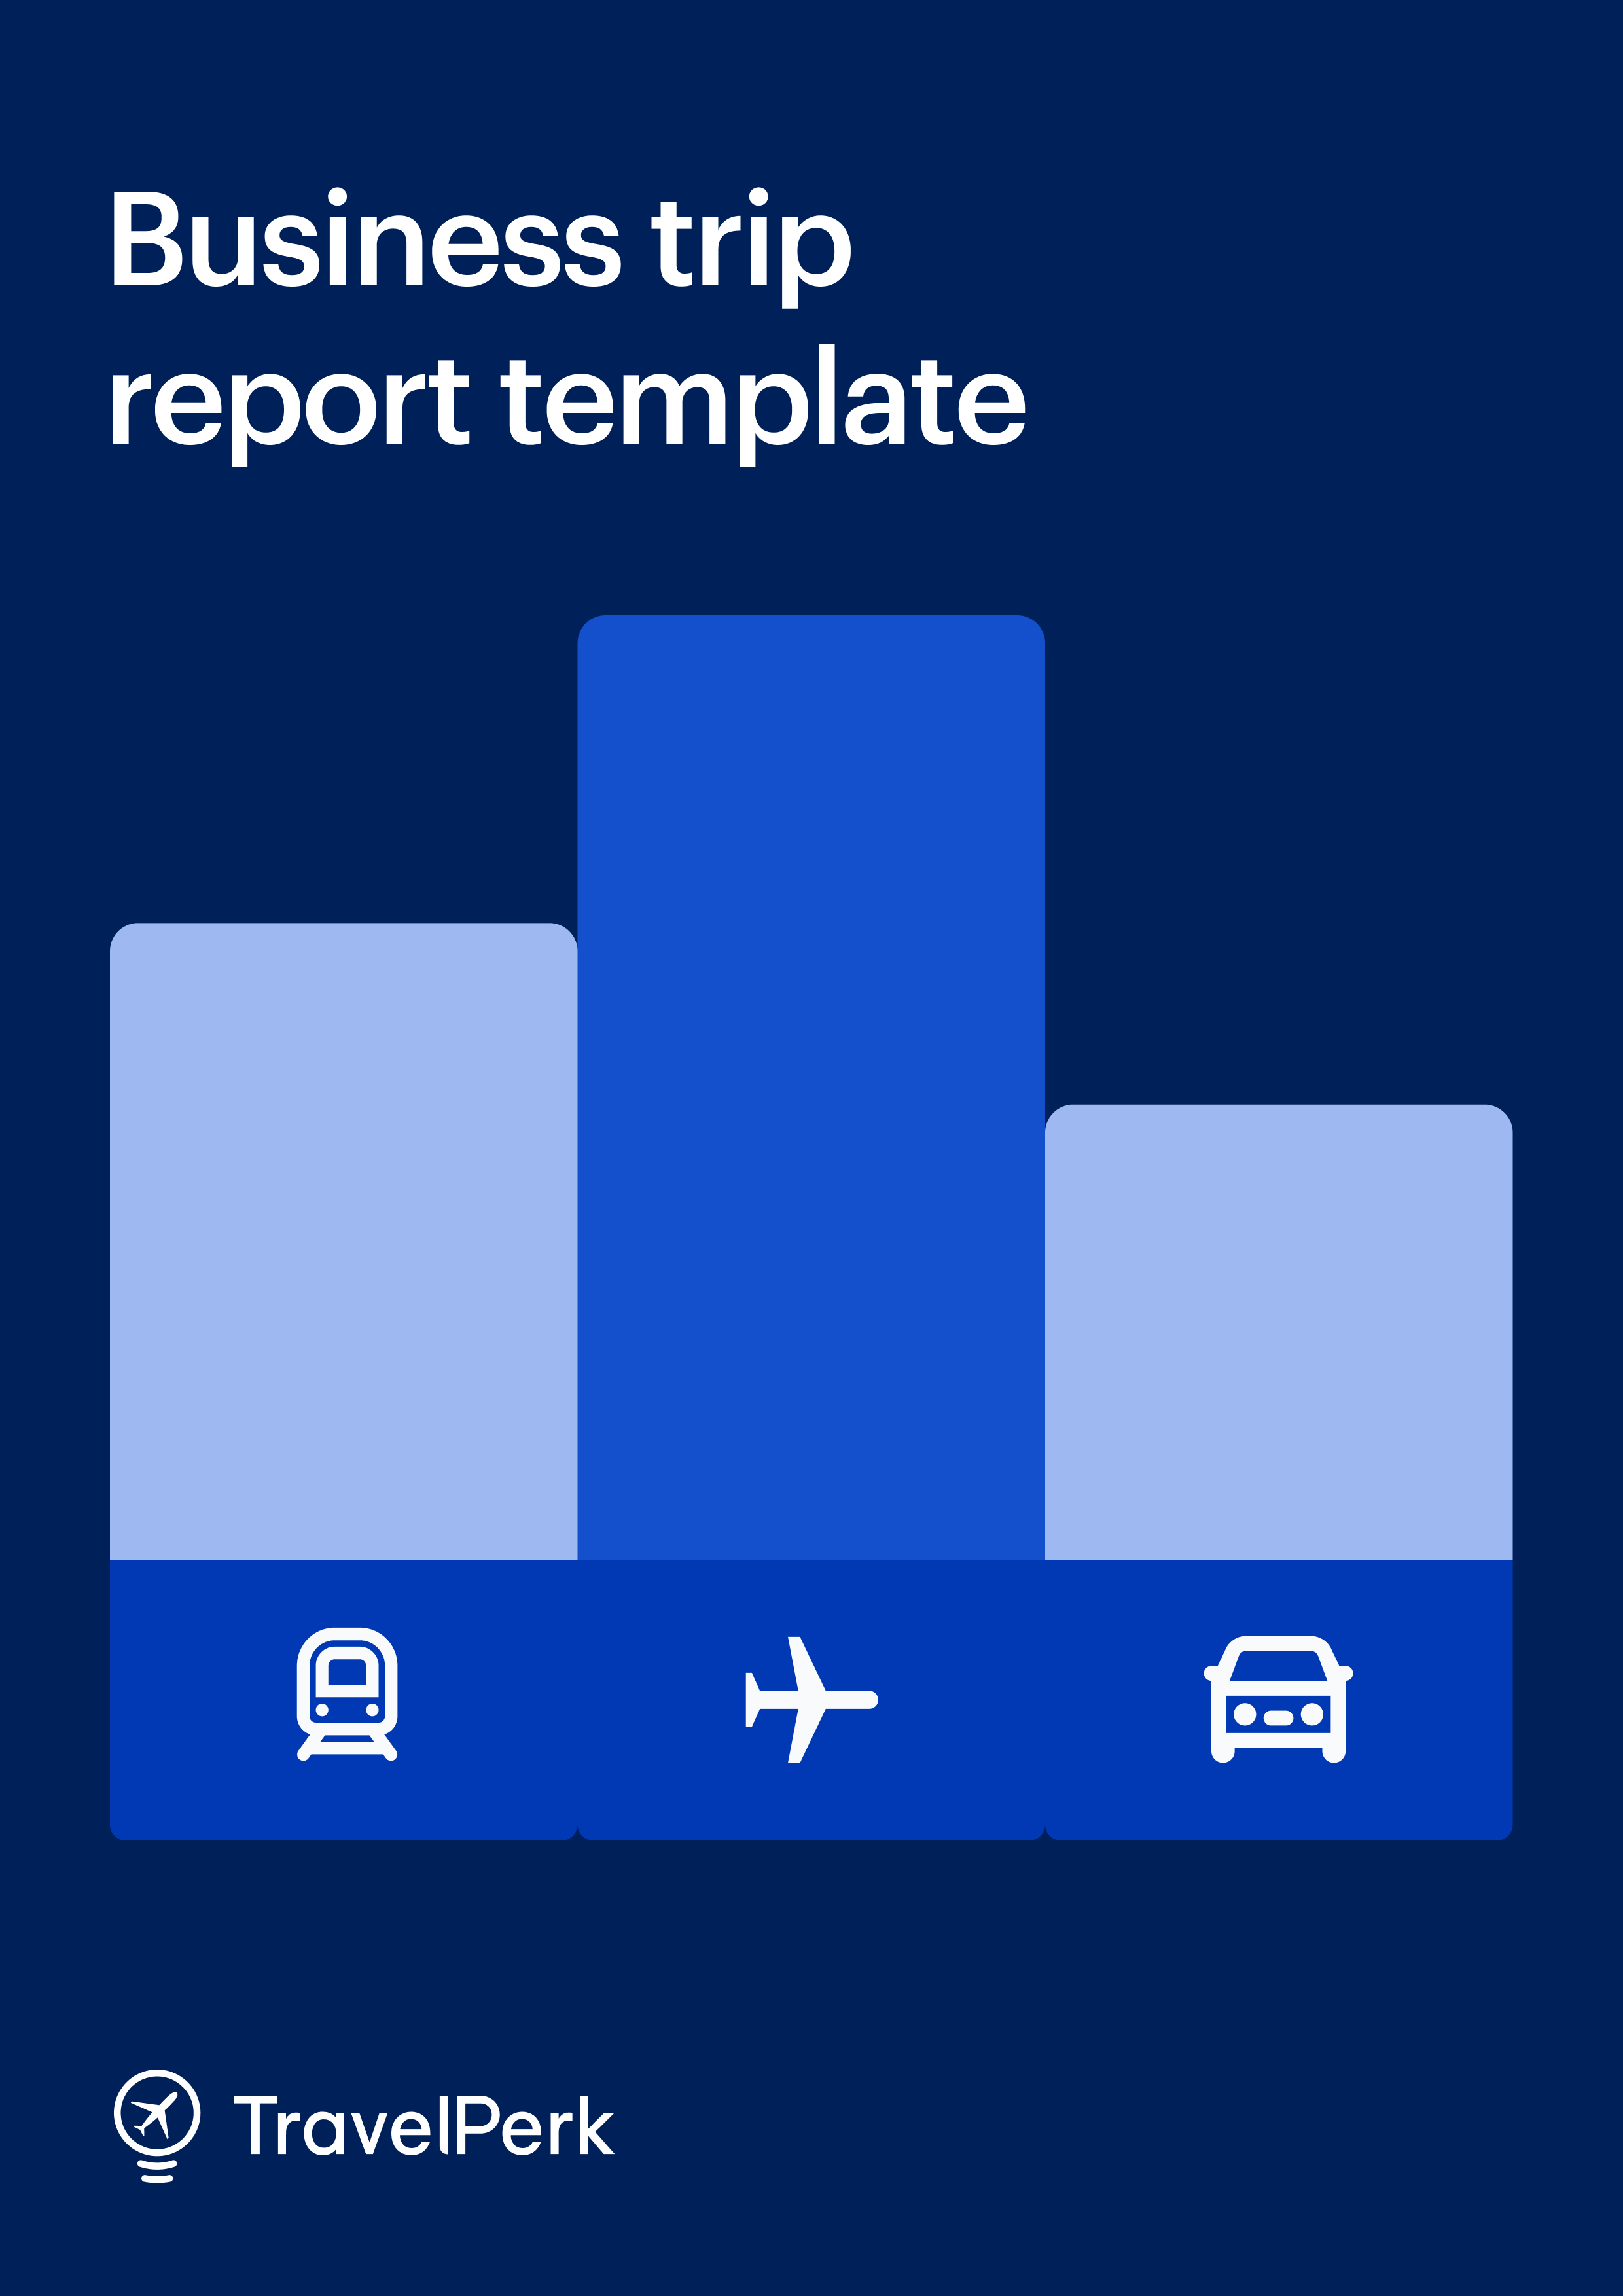 Business trip report template